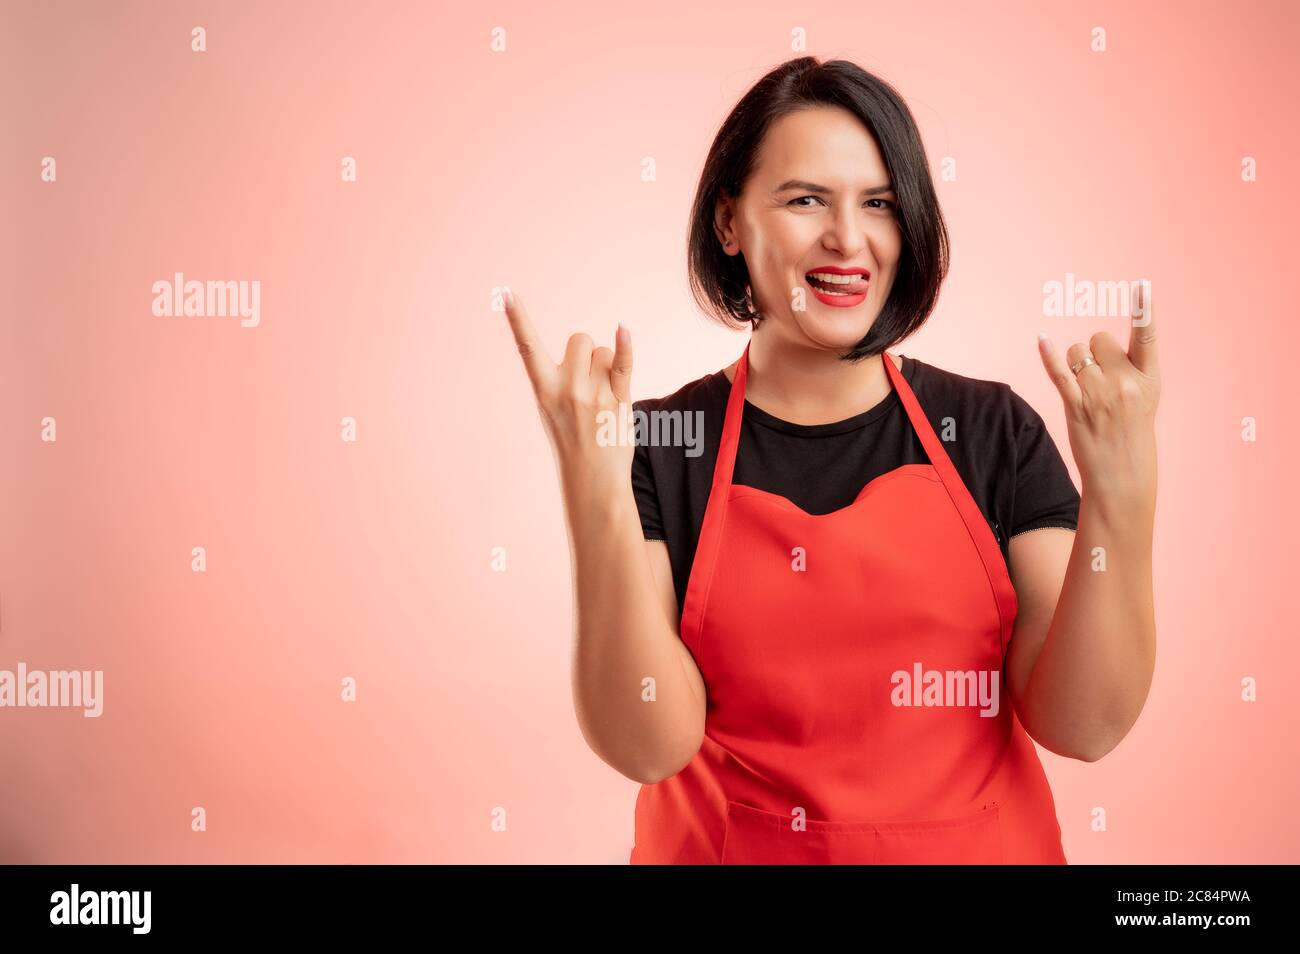 Woman employed at supermarket with red apron and black t-shirt, doing rock  symbol with hands up isolated on red background Stock Photo - Alamy